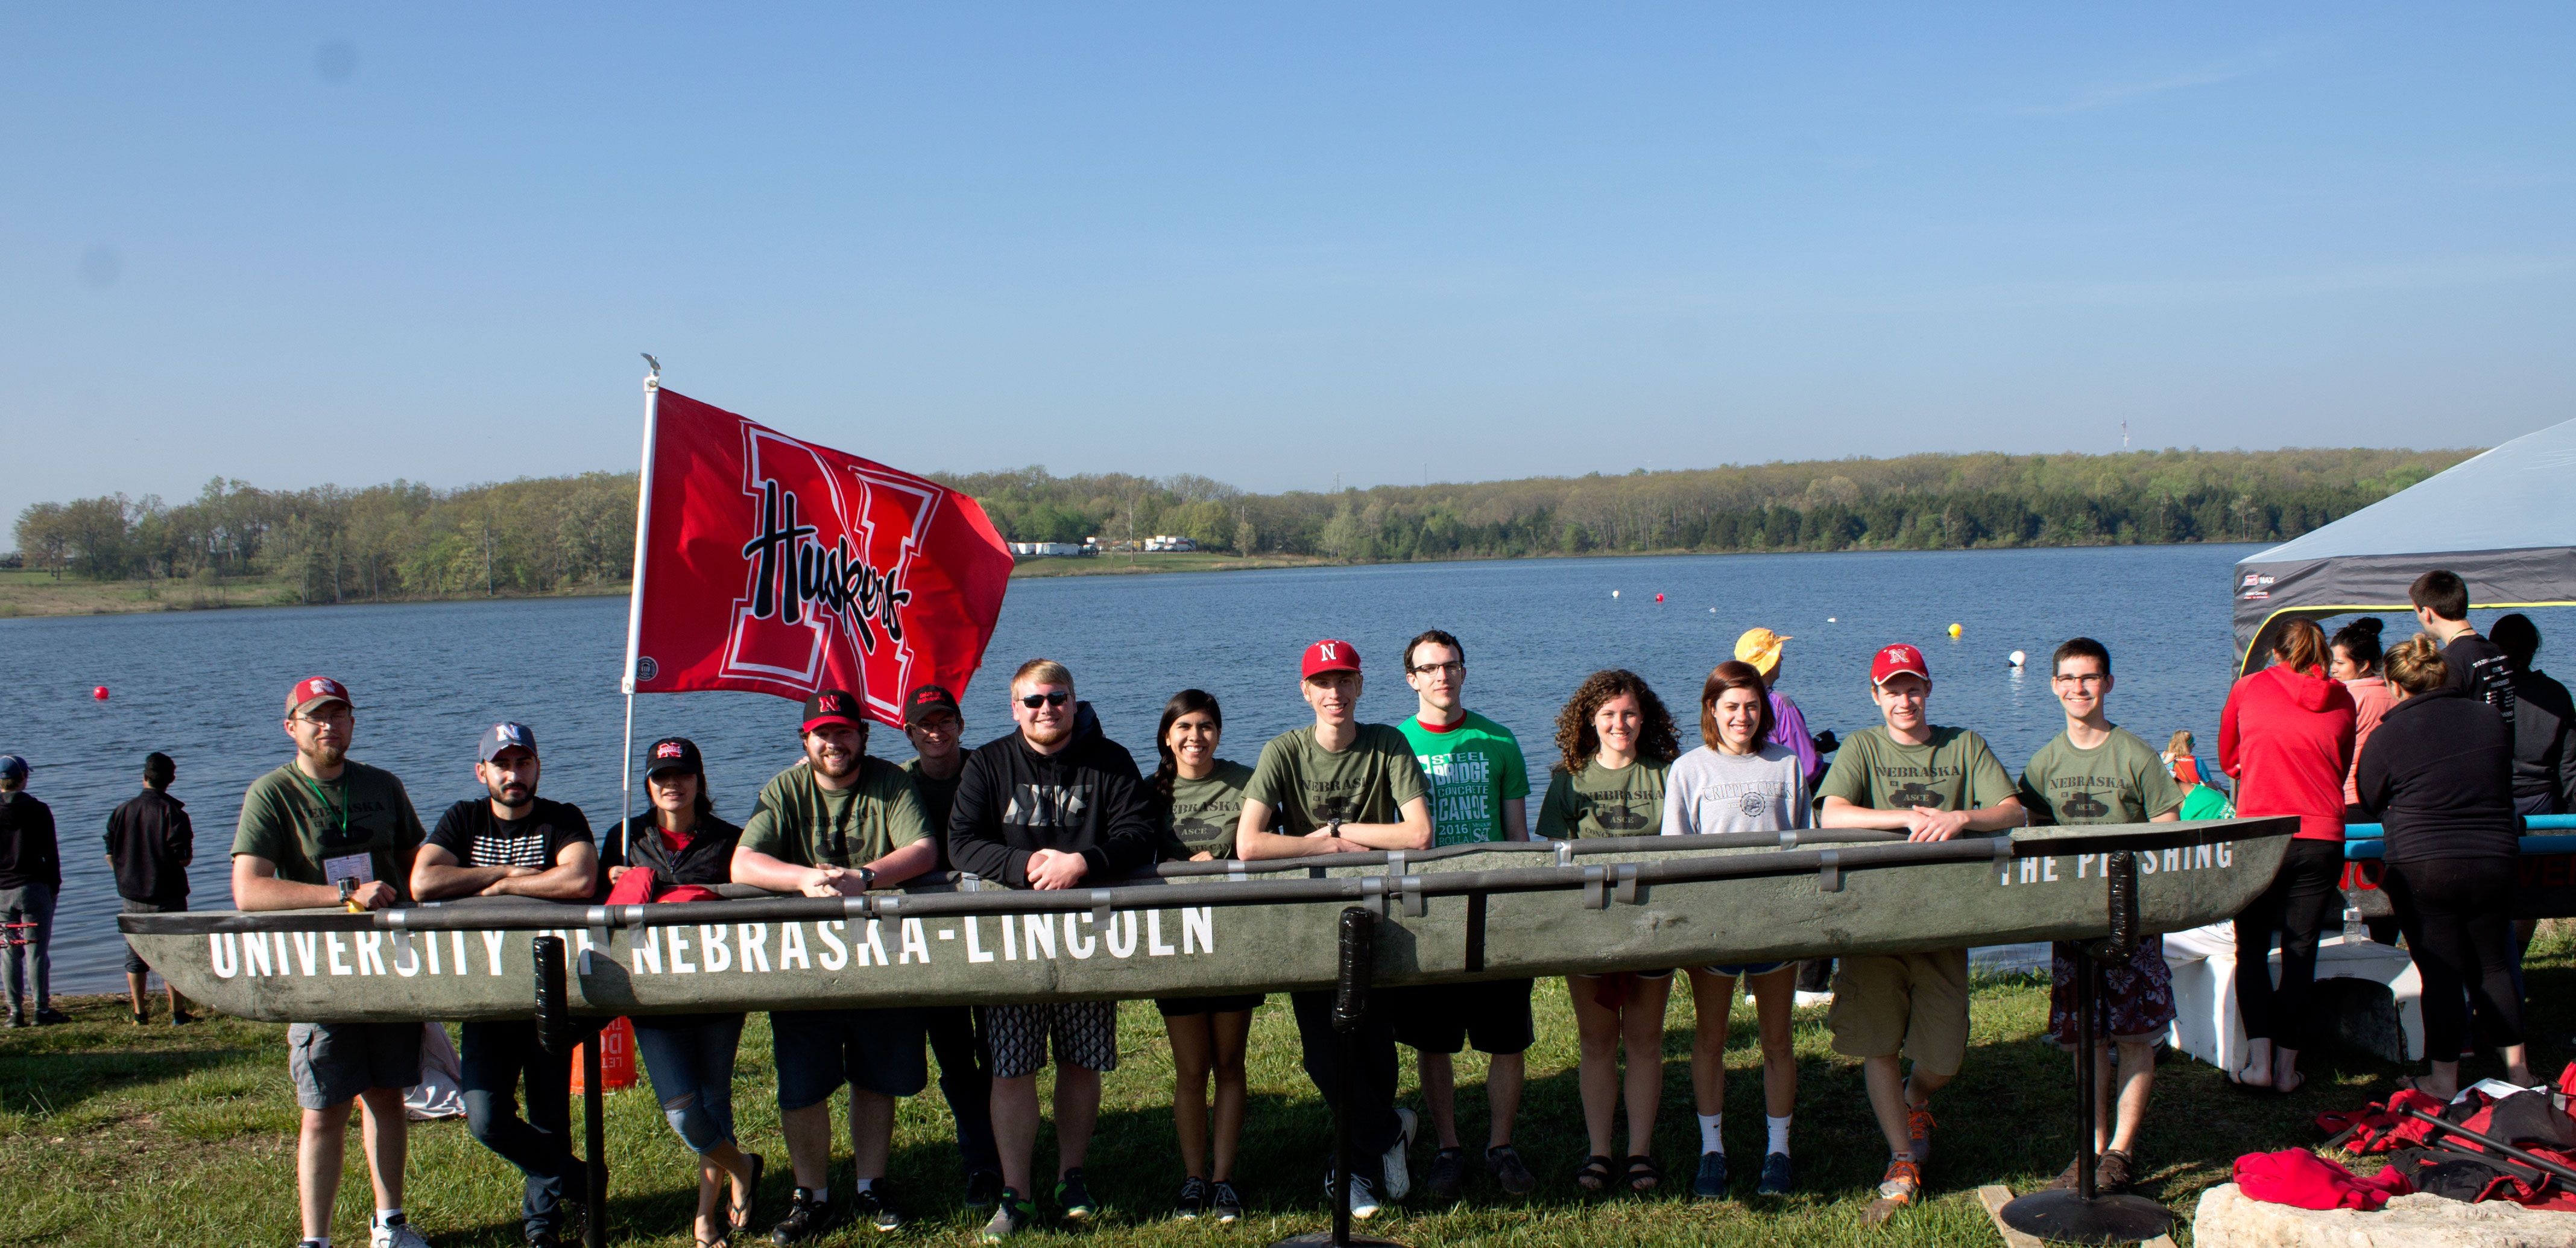 ASCE members with their canoe, The Pershing